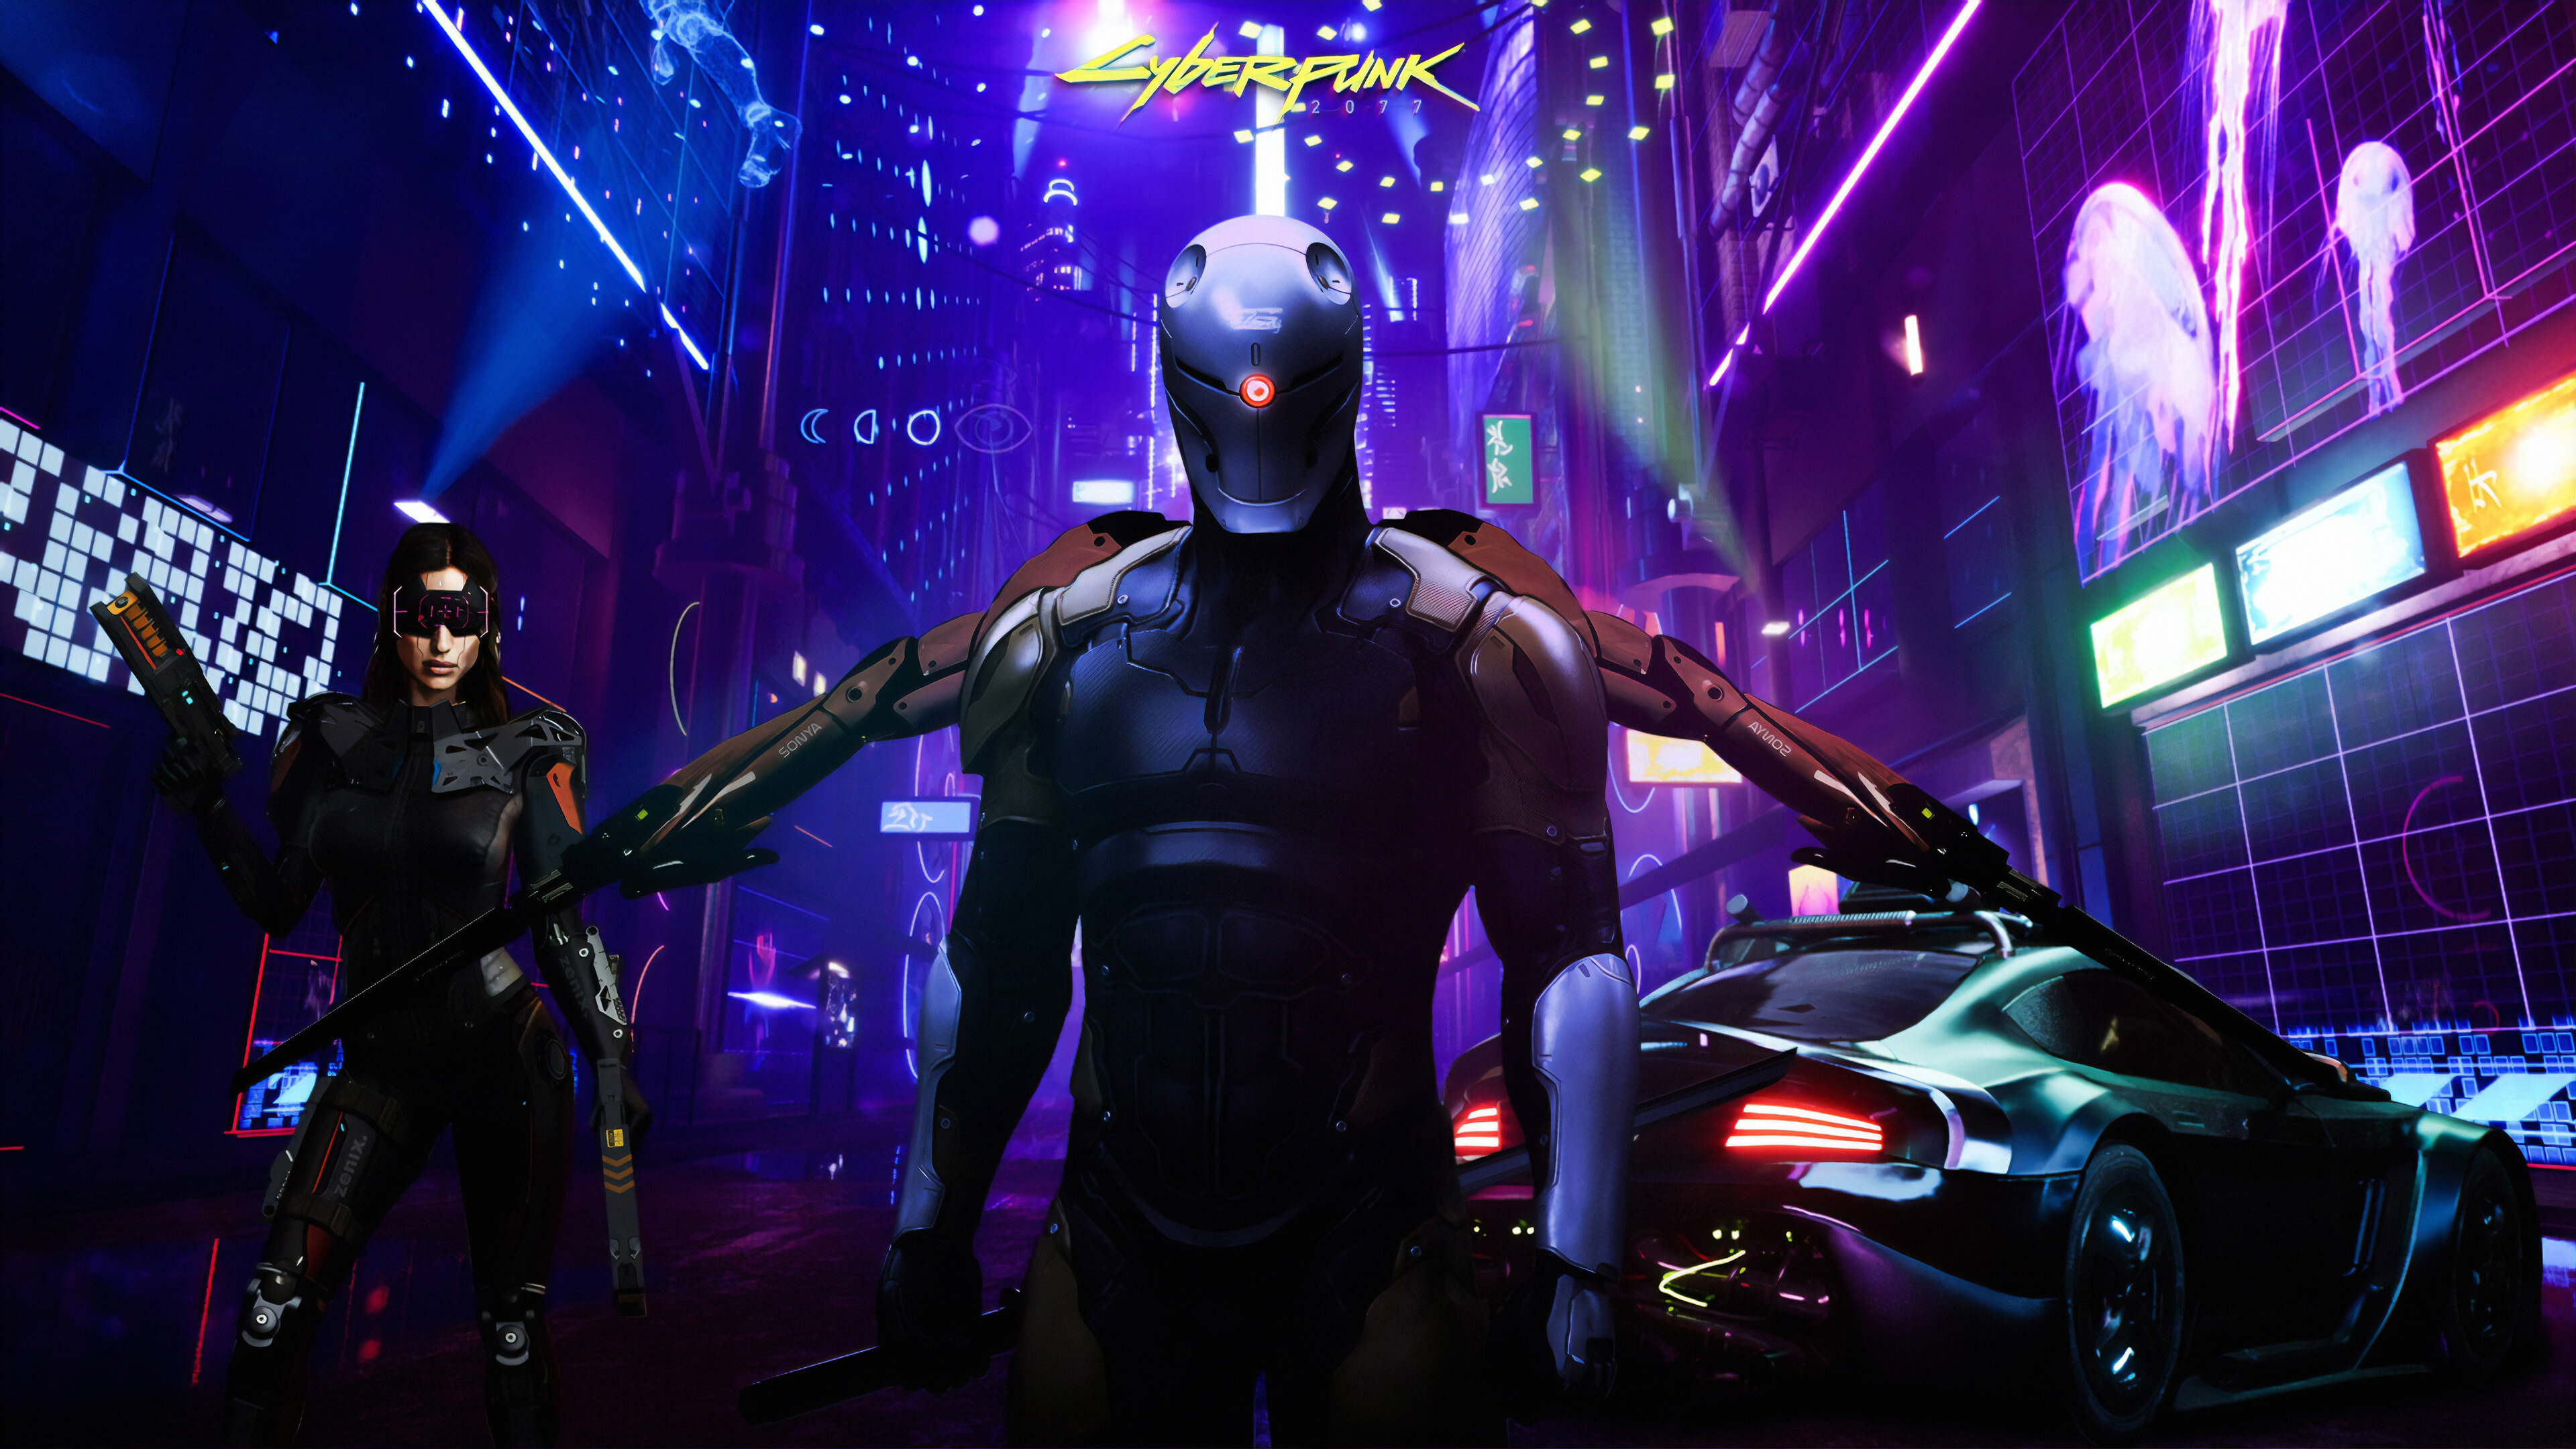 Cyberpunk 2077: The story takes place in Night City, An open world game. 3840x2160 4K Wallpaper.